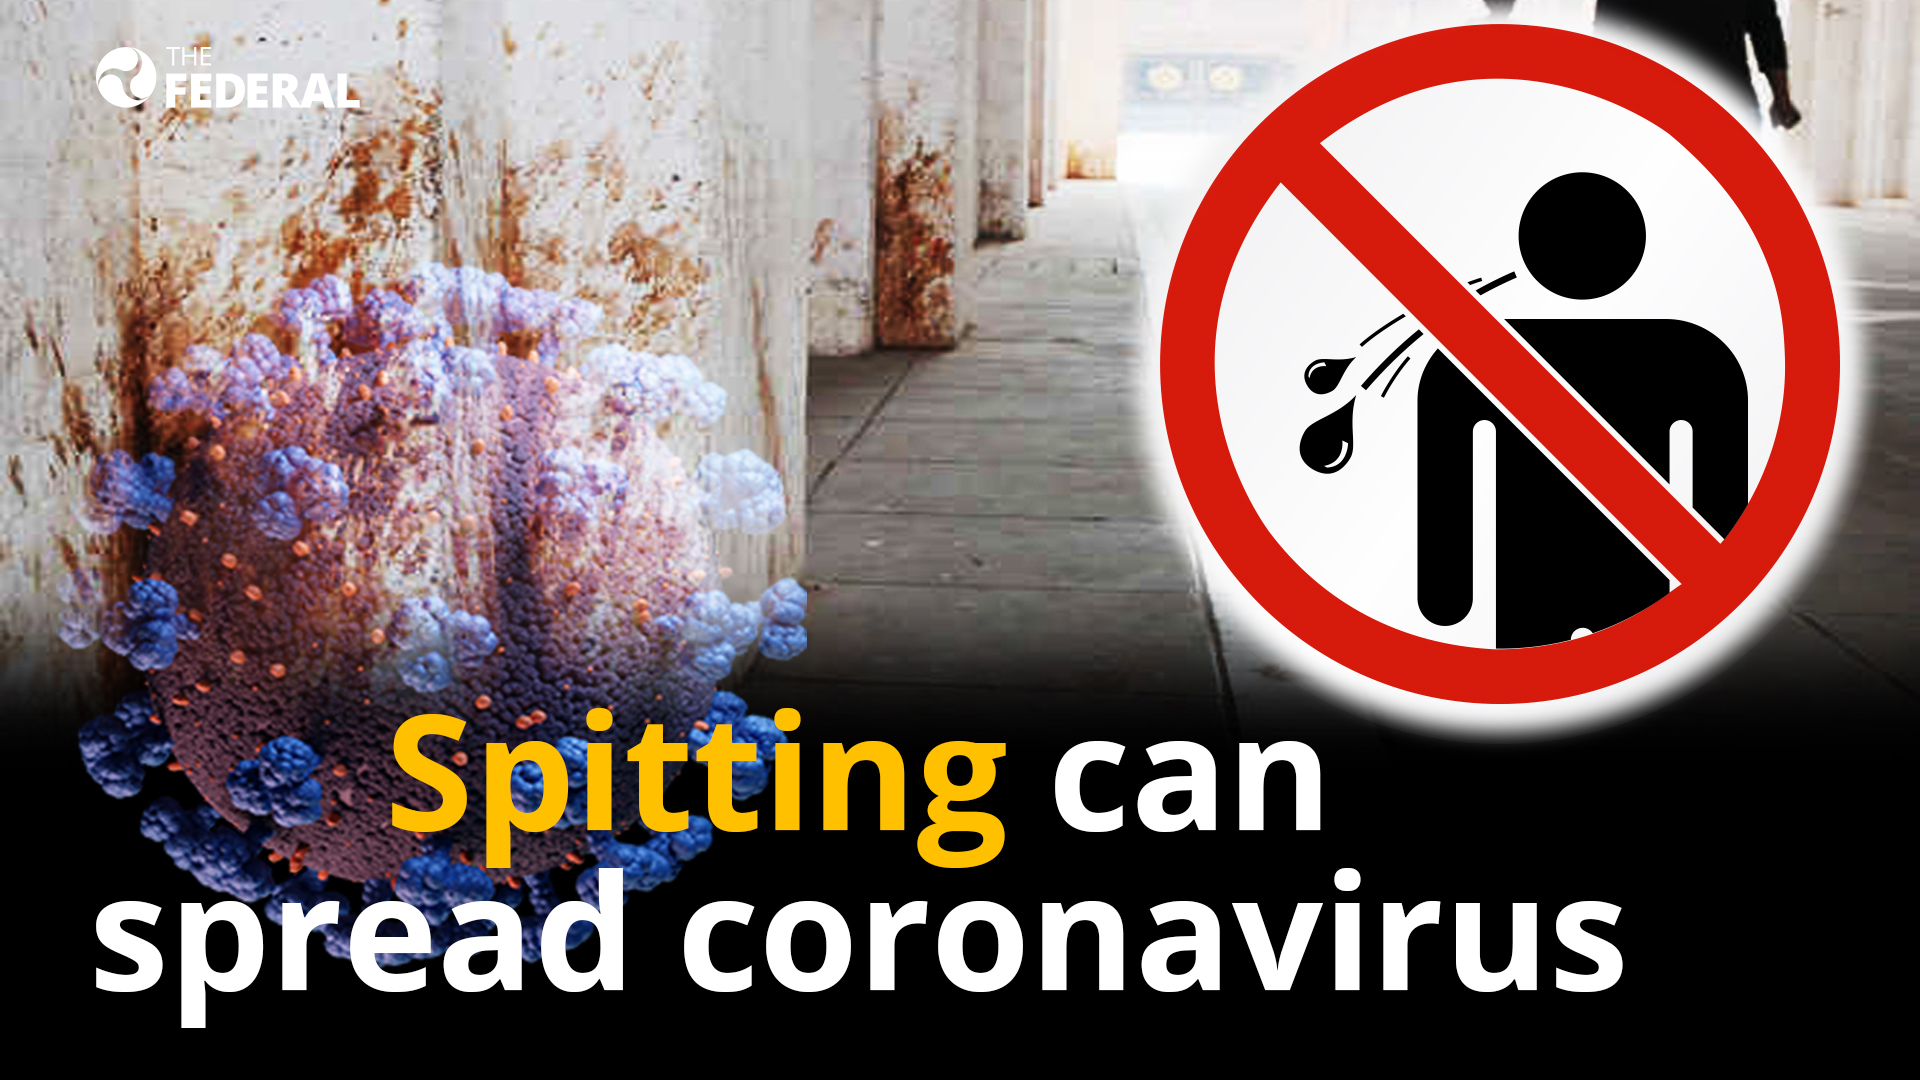 Spitting can spread coronavirus, time to stop